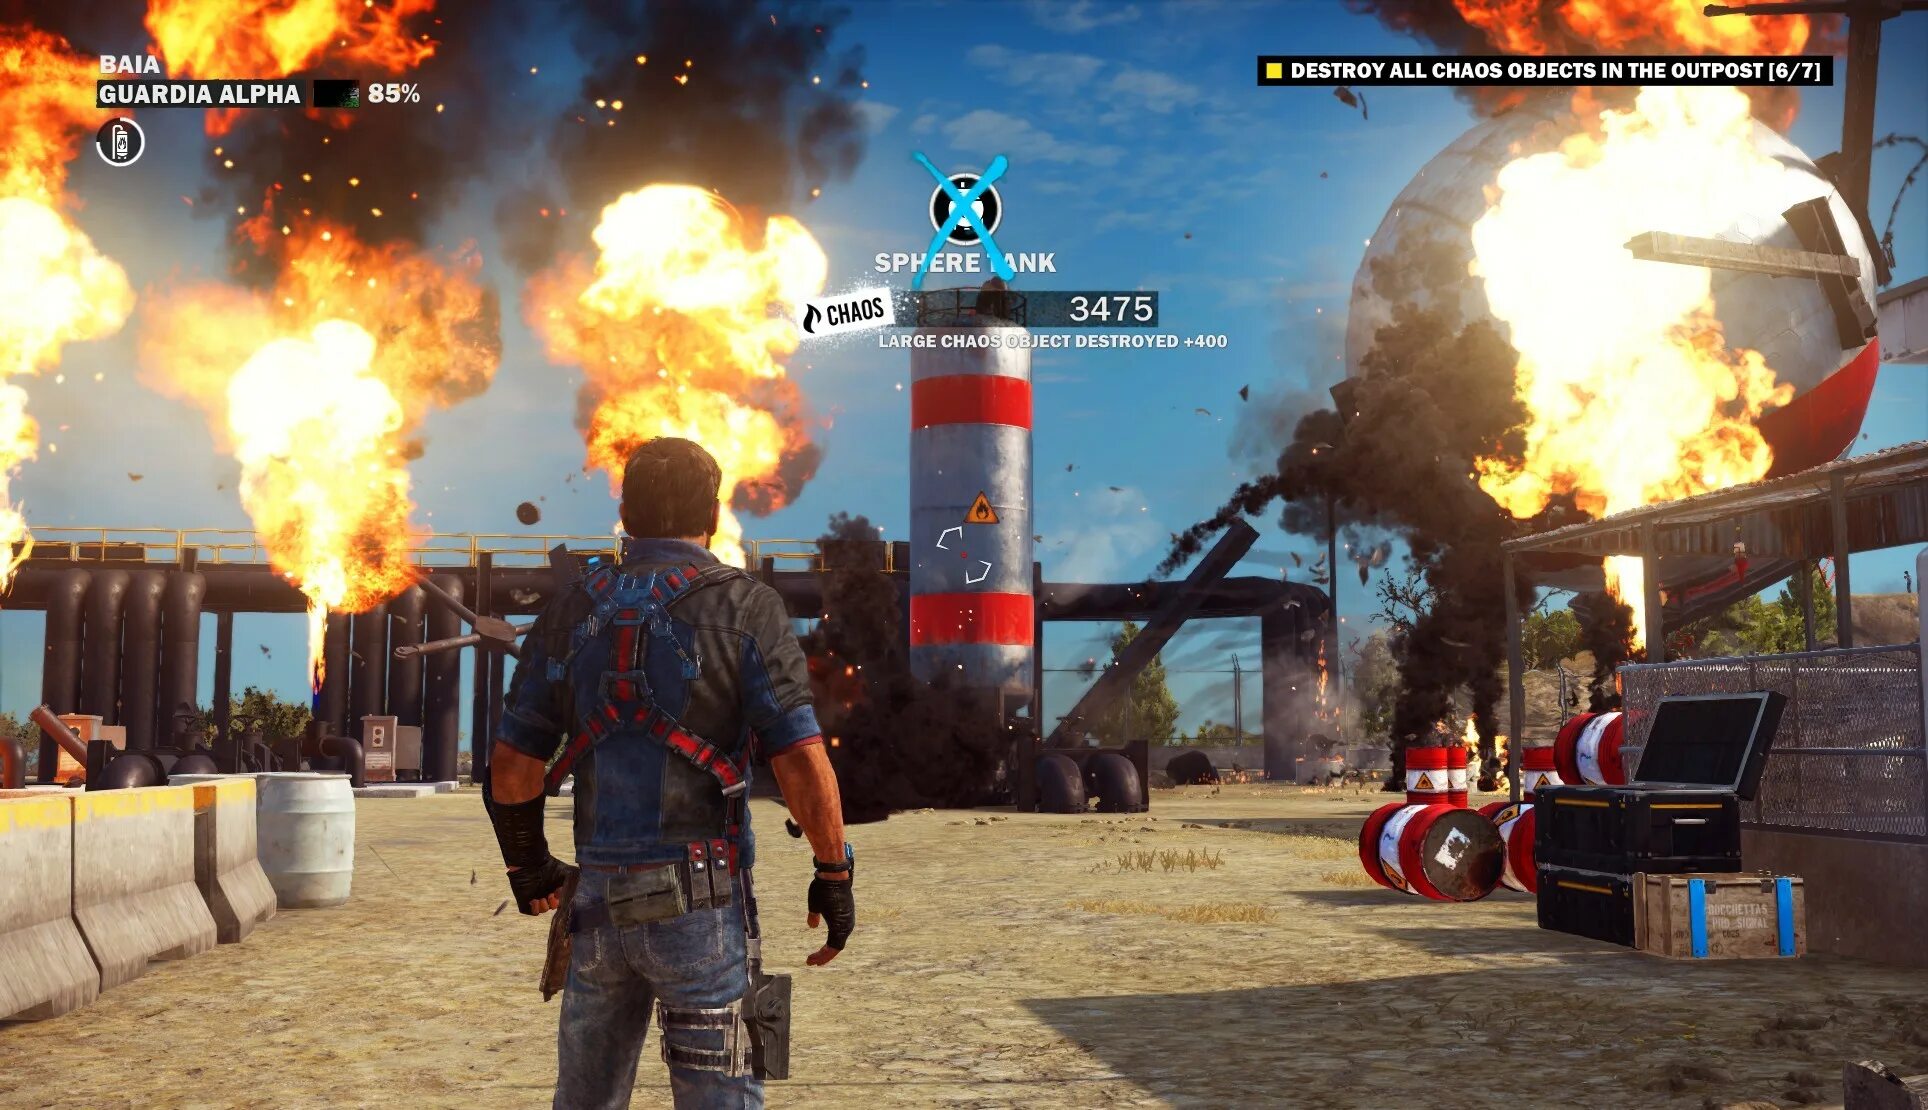 Игра just cause 3. Just cause 3 Gameplay. Just cause 3: Multiplayer Mod. Just cause 1.